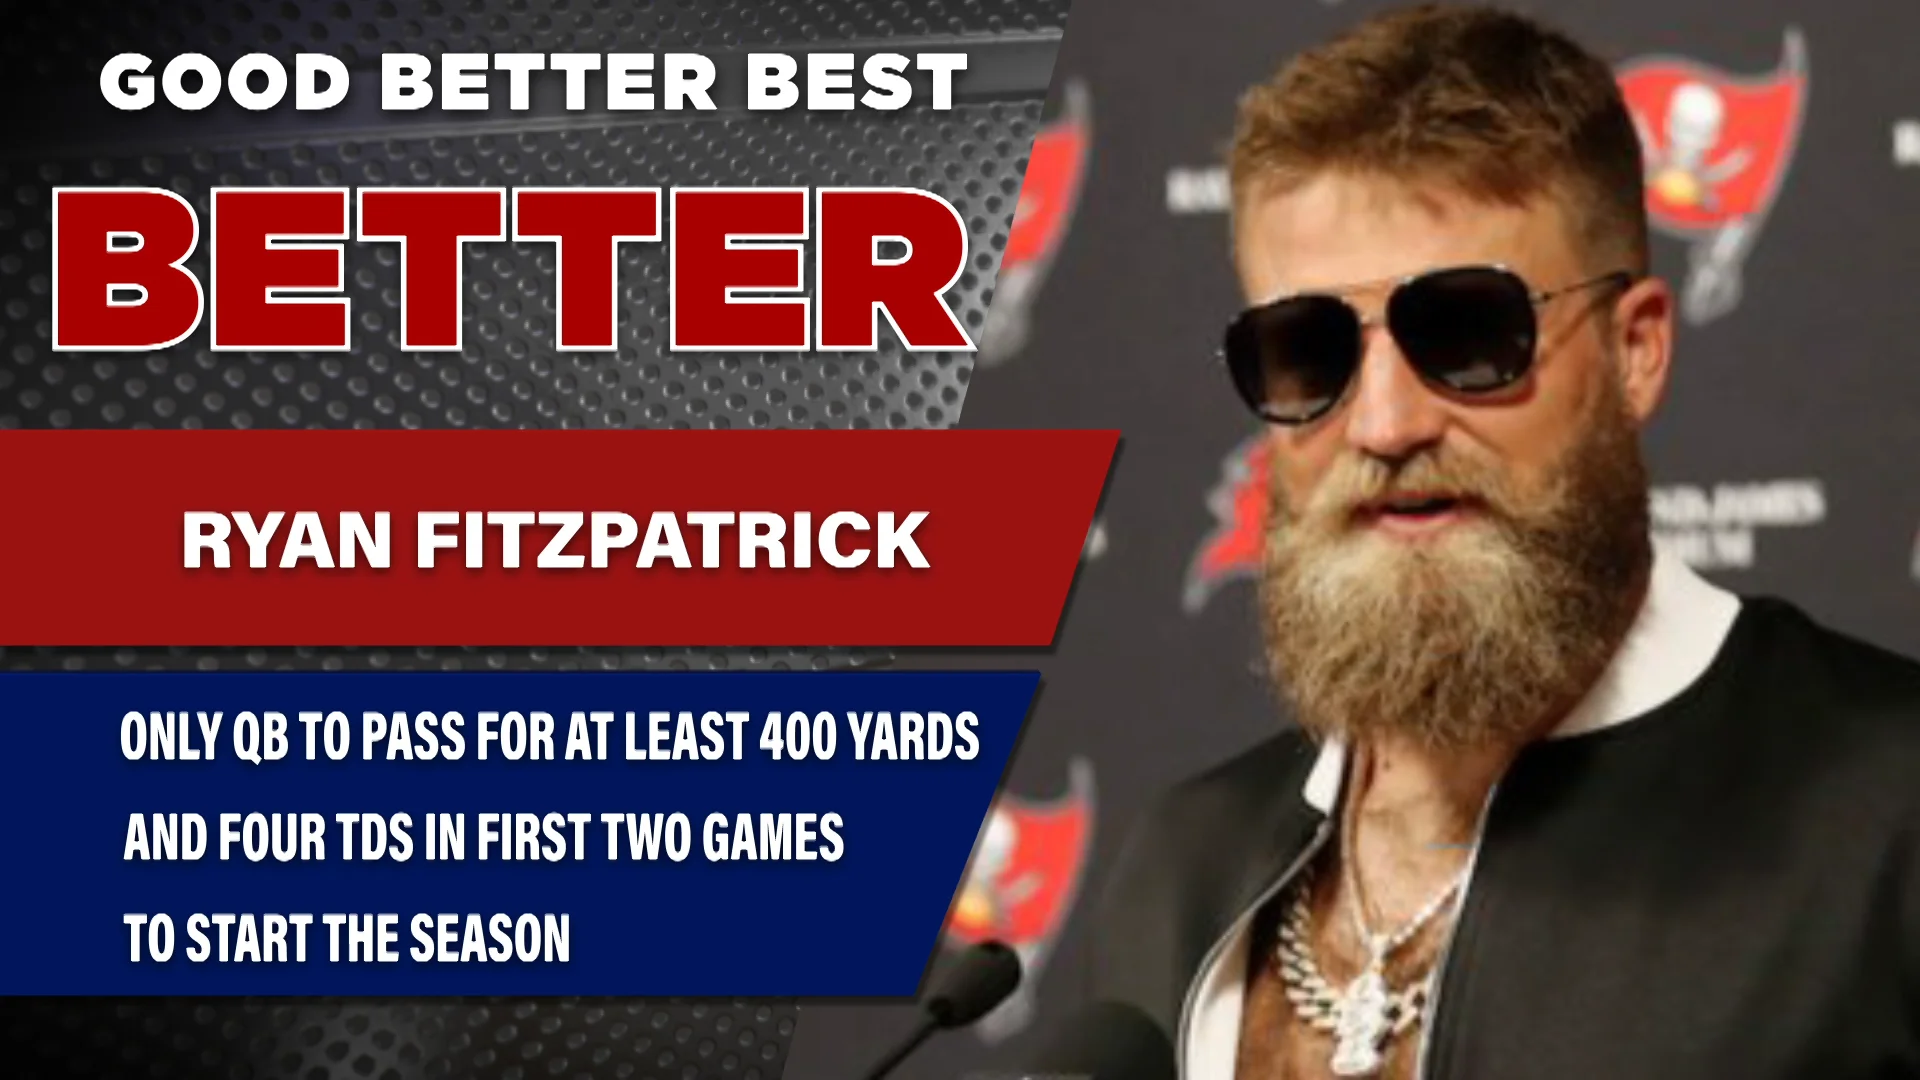 Ryan Fitzpatrick Sexy Outfit Is Everything on Vimeo